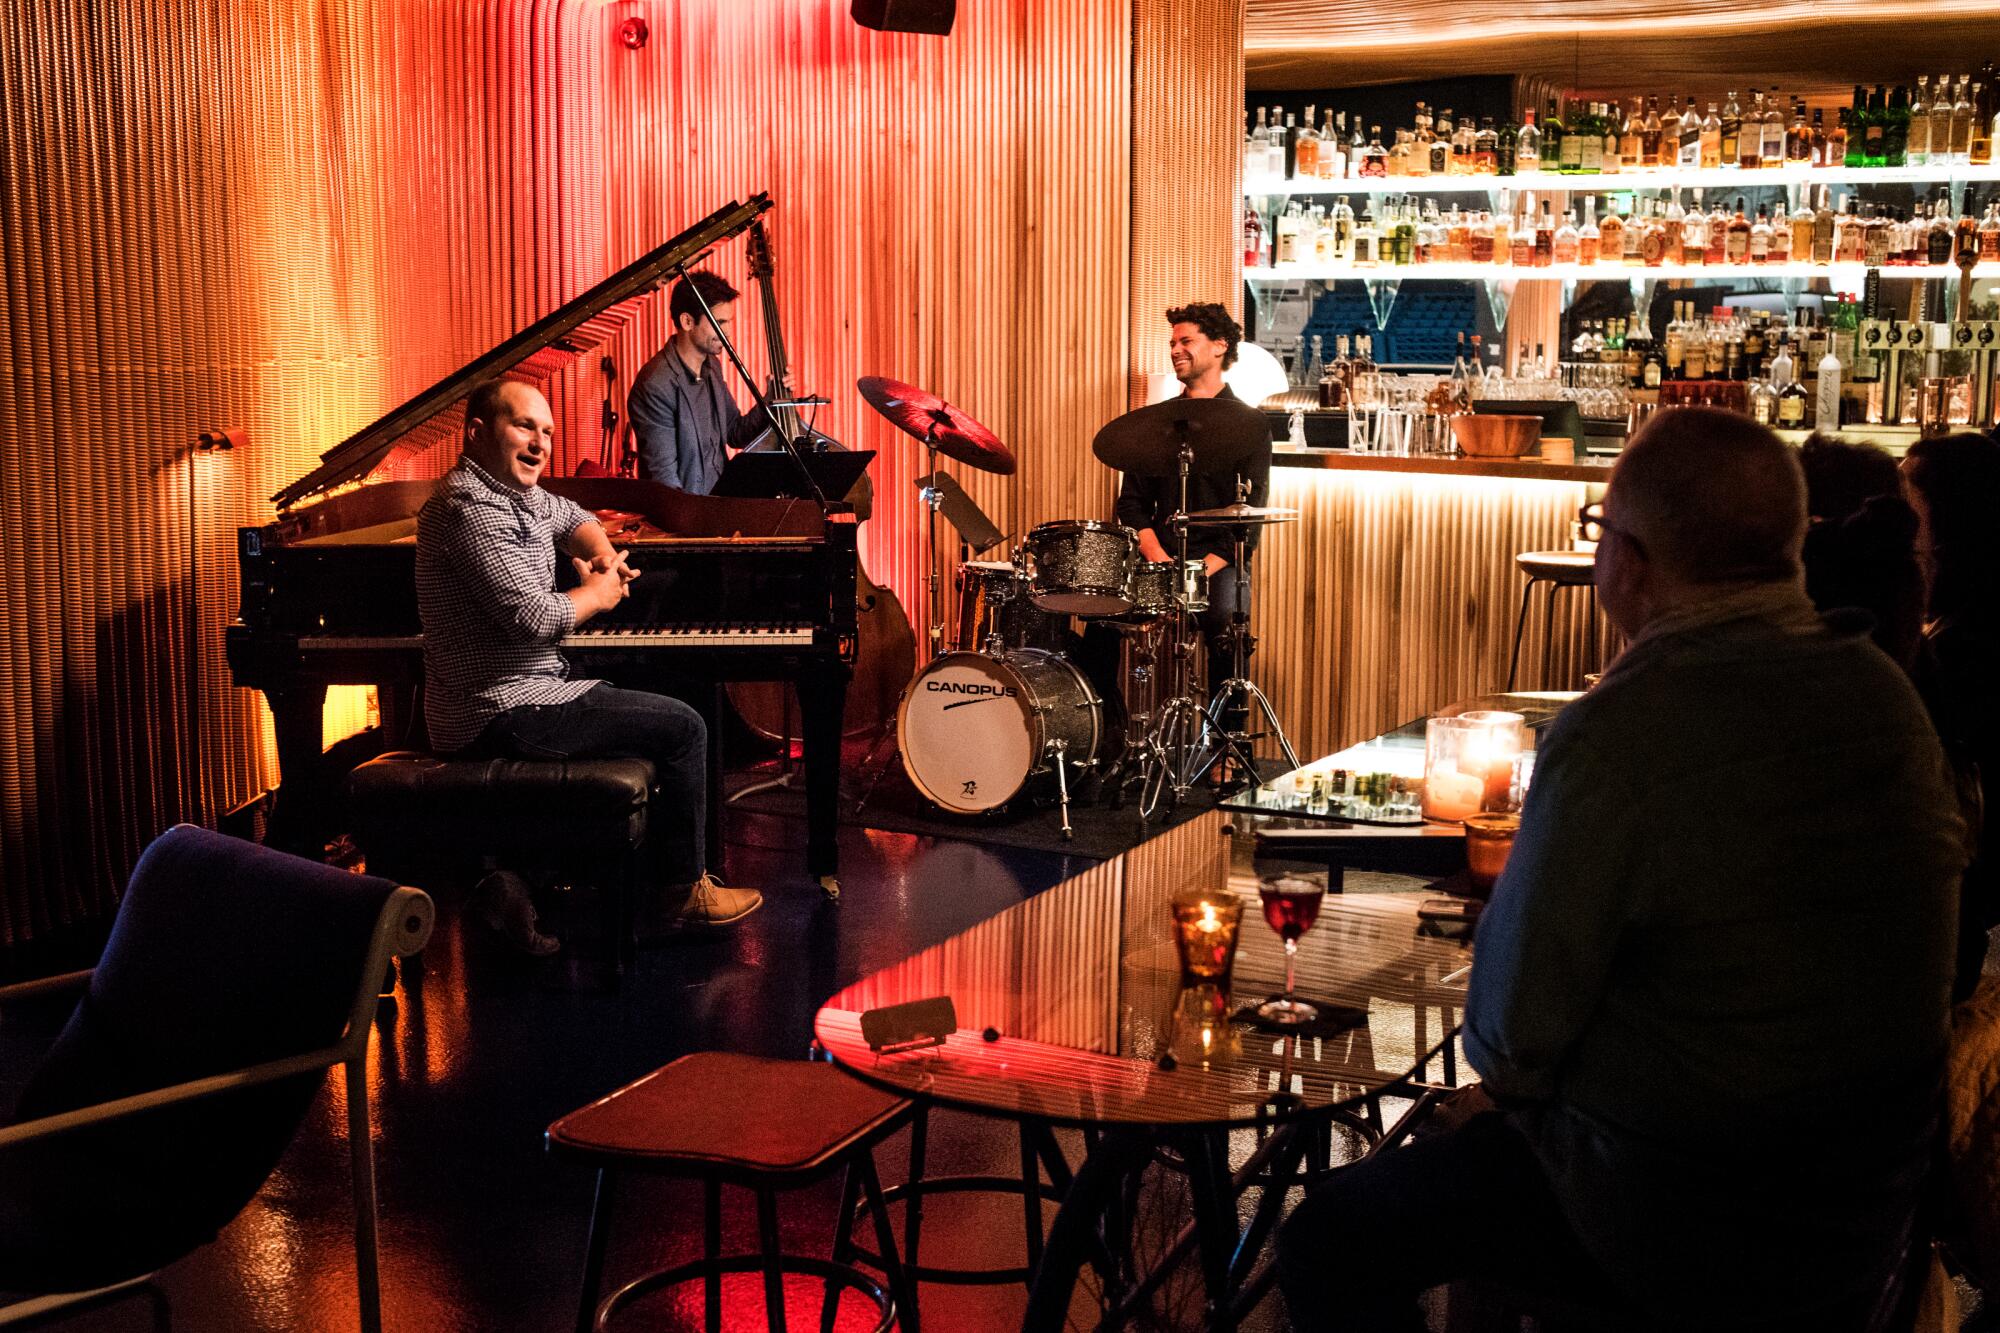 A group of jazz musicians sit with their instruments at a bar